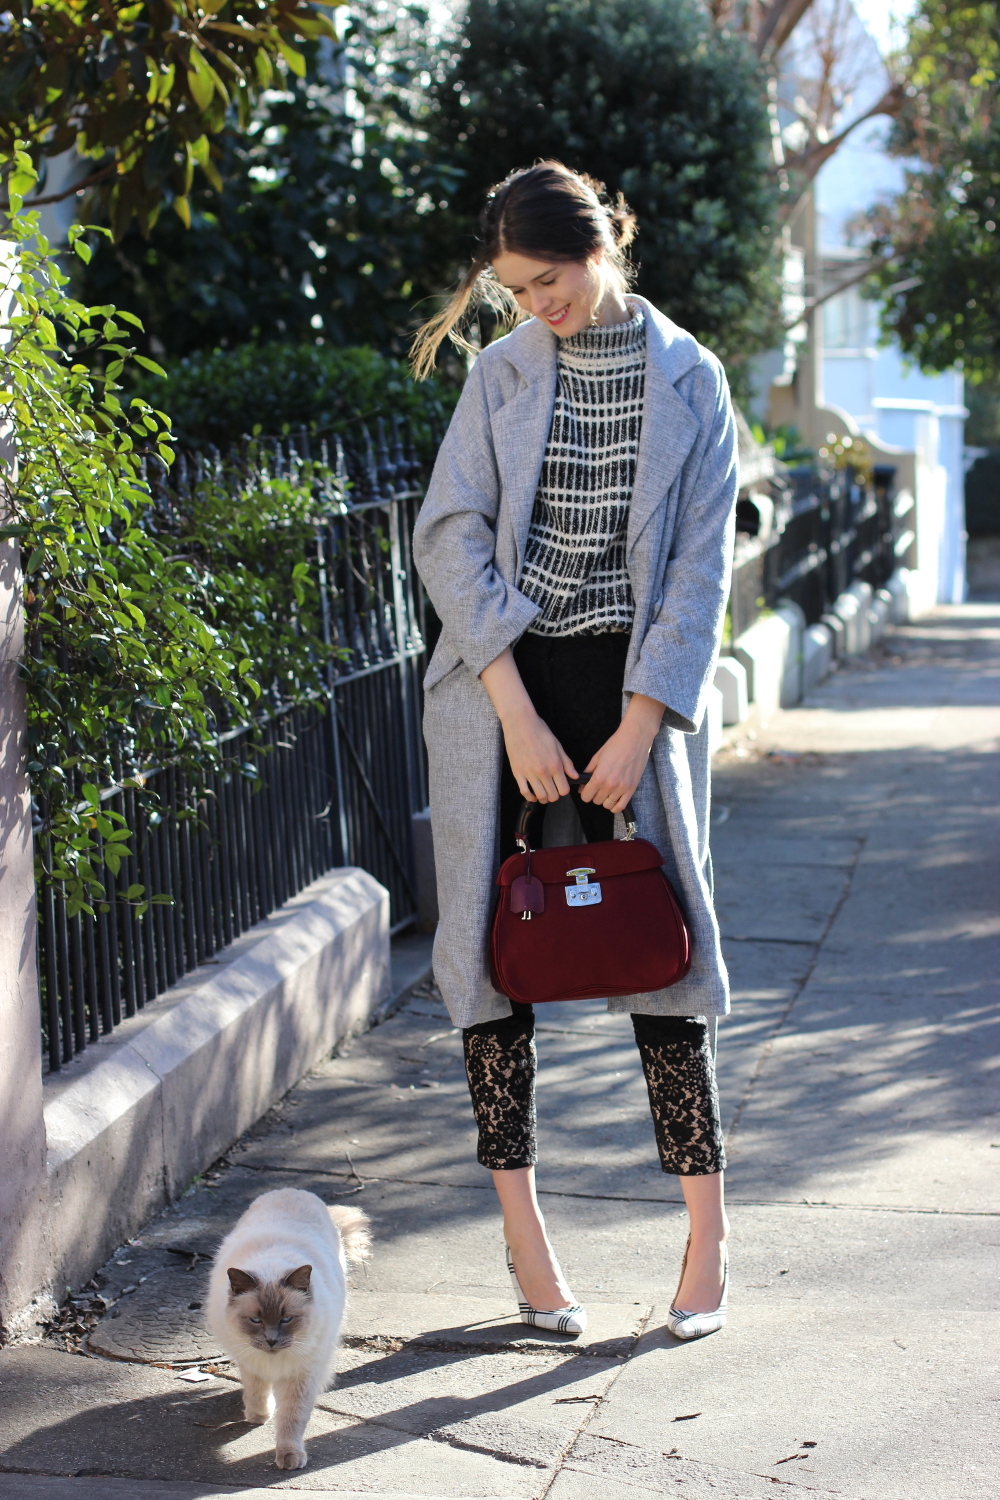 BYCHILL Style Blog by Chloe Hill, wearing Lonely Hearts the Label, Joseph and Maurie and Eve